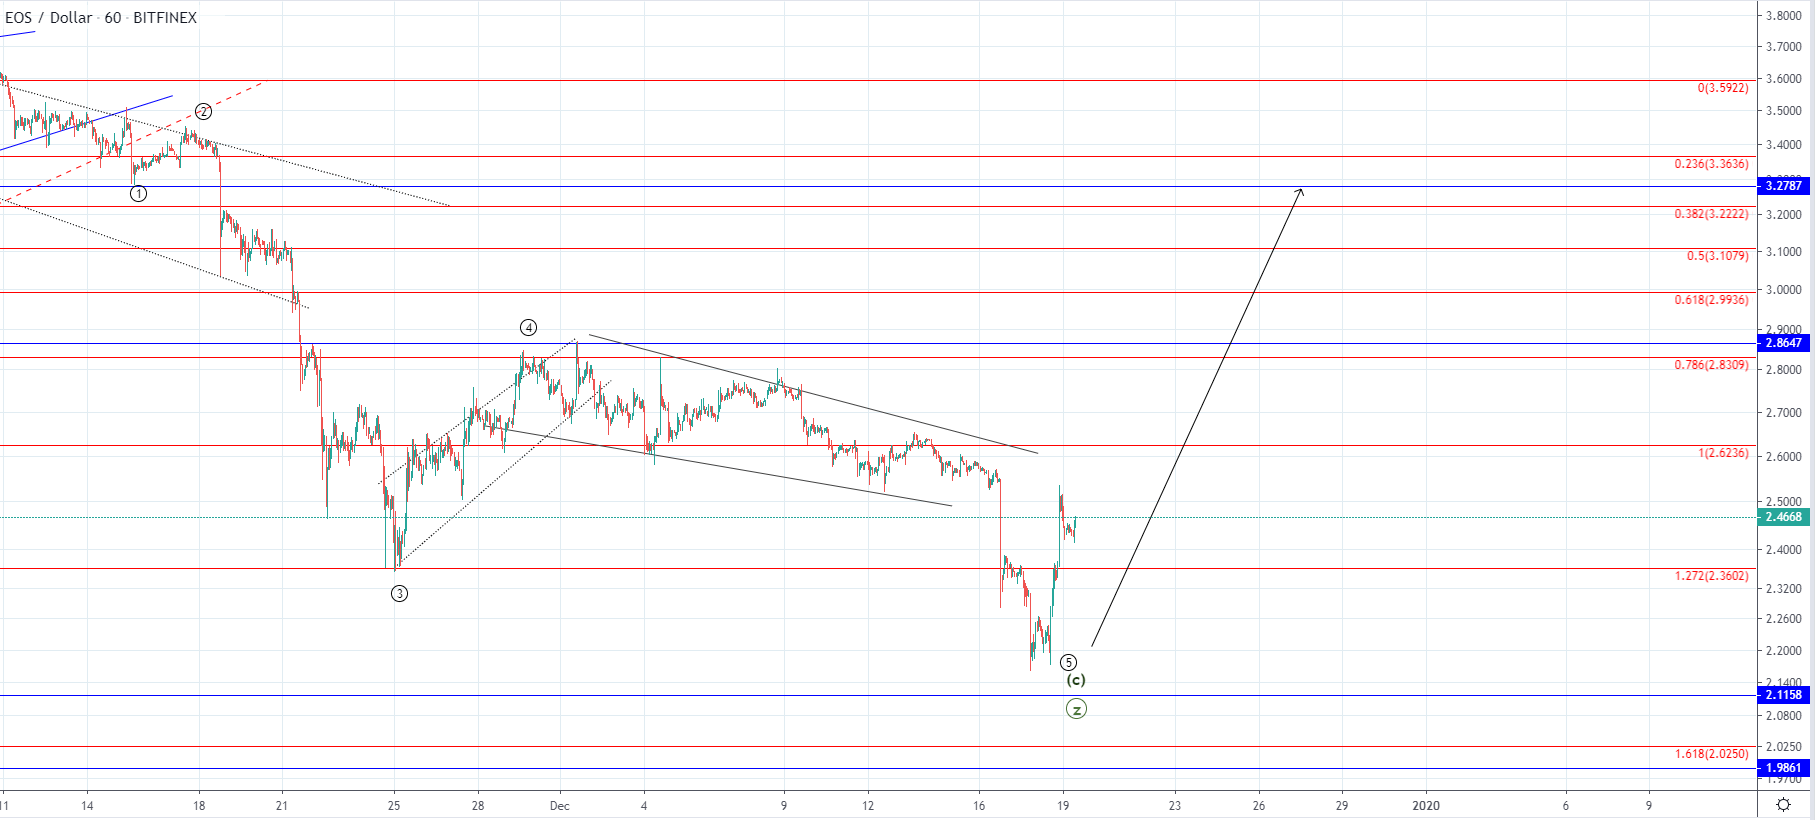 LTC and EOS - Has the expected recovery started?